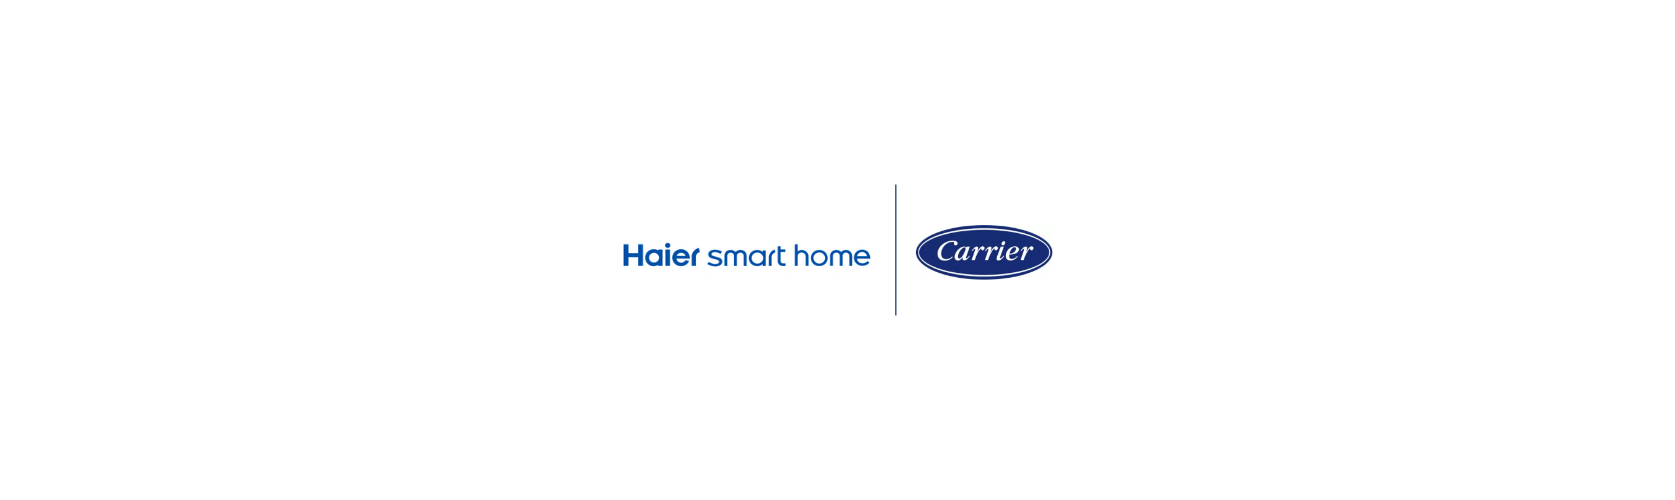 Carrier Launches the BluEdge Service Platform for HVAC Customers in Europe,  Carrier Klimatechnik GmbH, Story - PresseBox